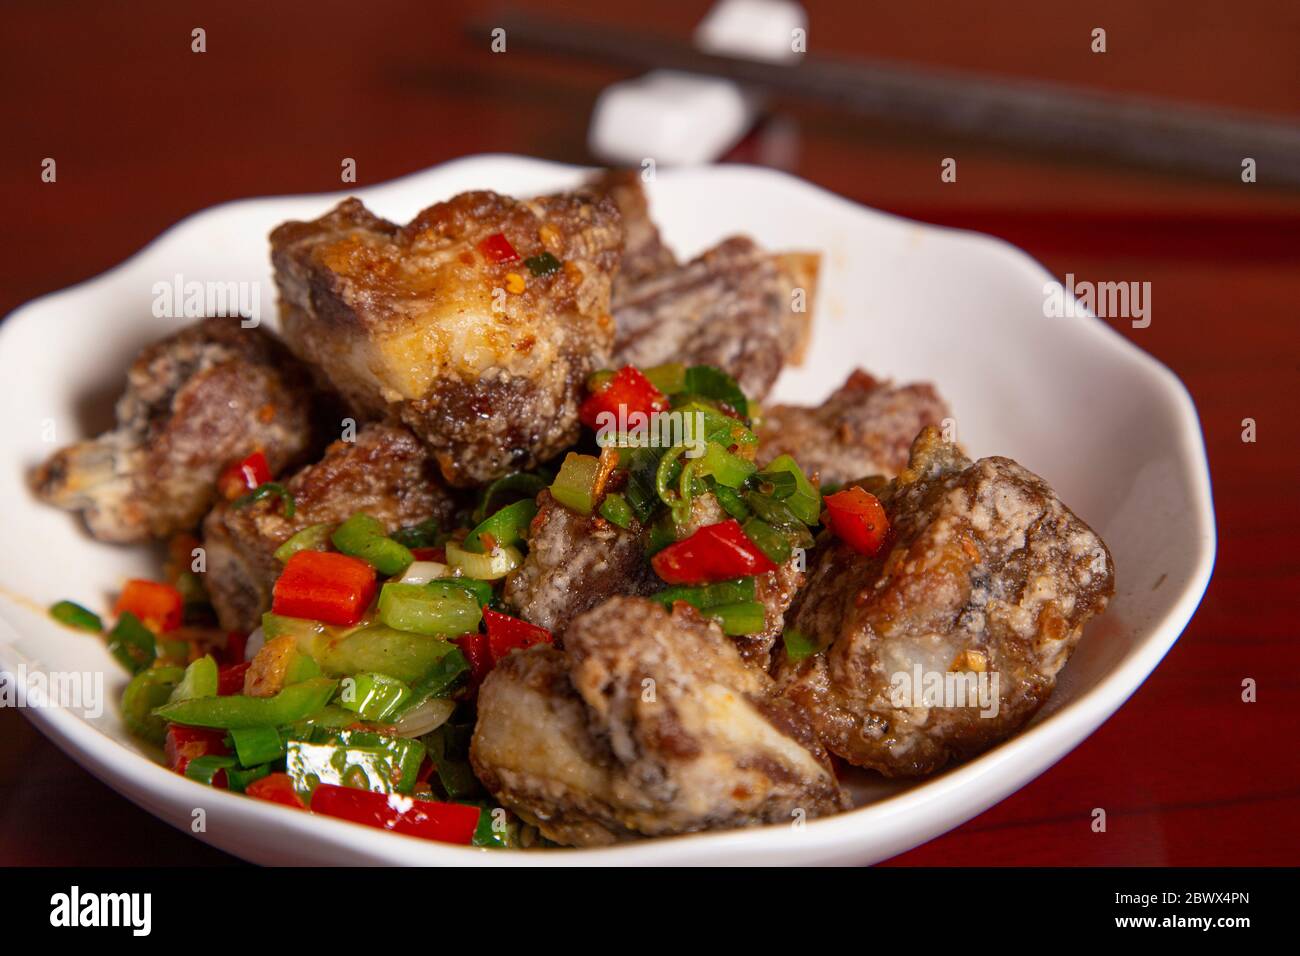 Plate of ribs with salt and pepper with pieces of vegetables. Isolated image. Oriental gastronomy Stock Photo